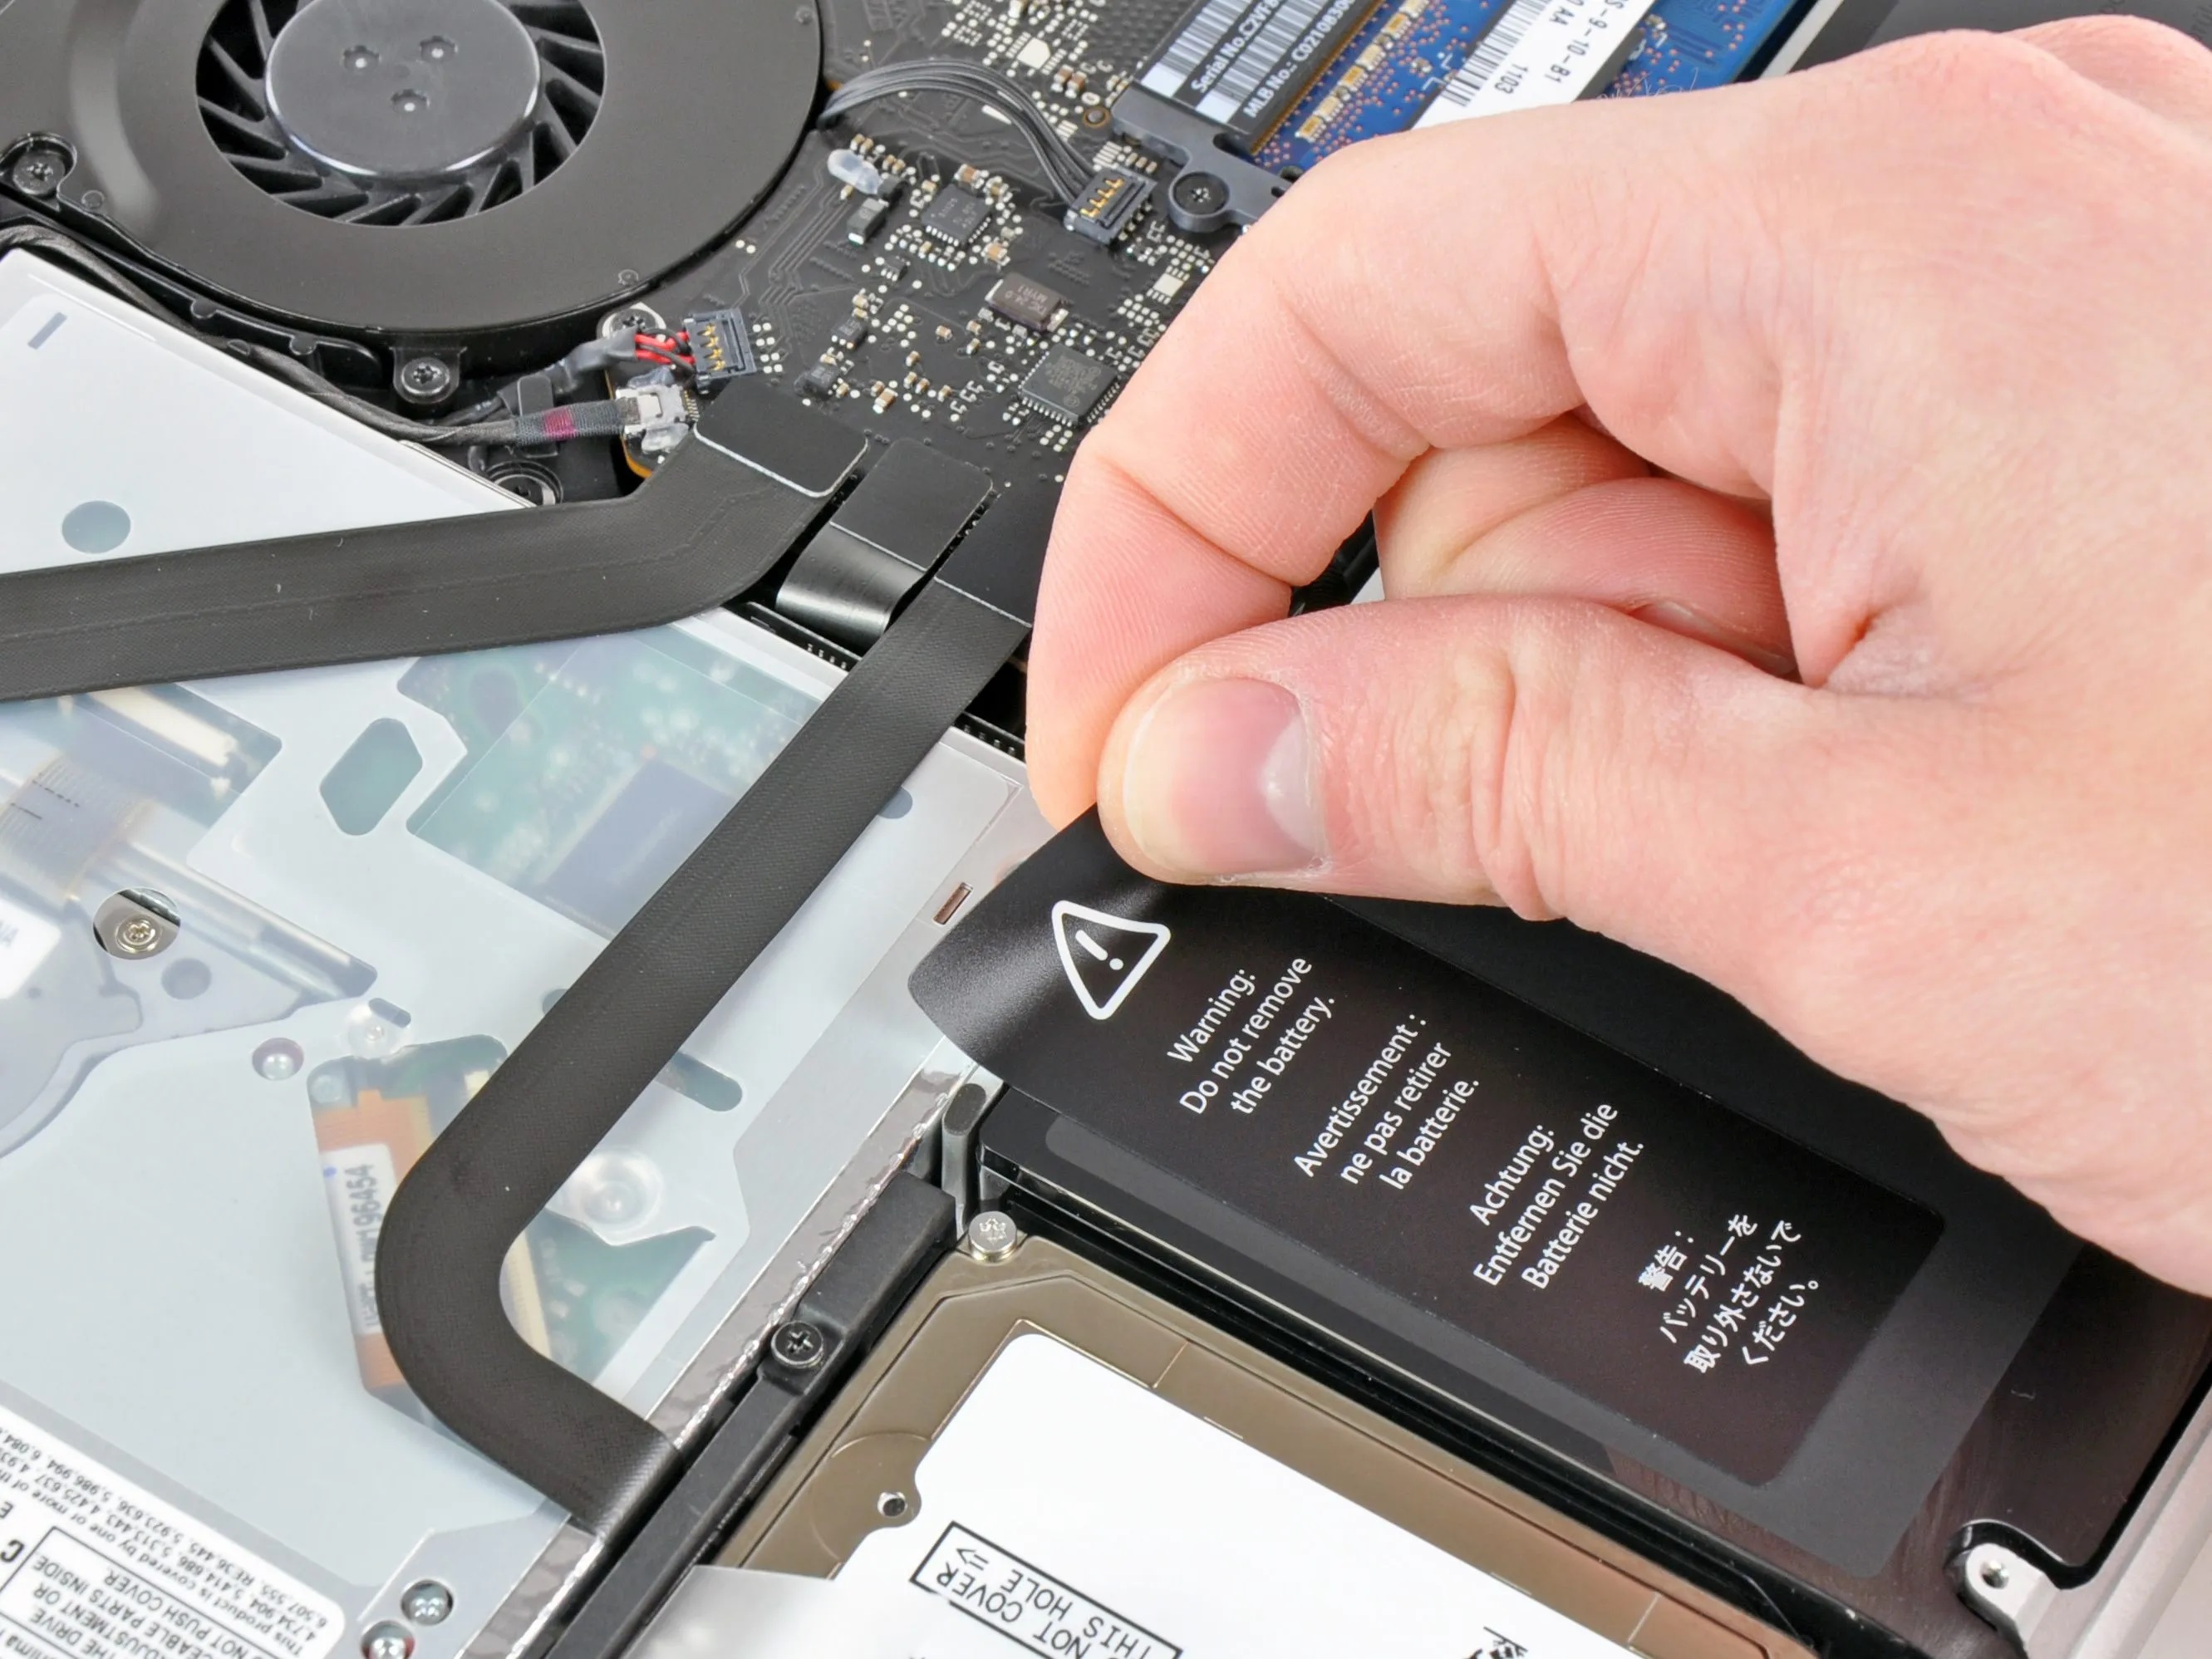 How To Replace A MacBook Pro Battery